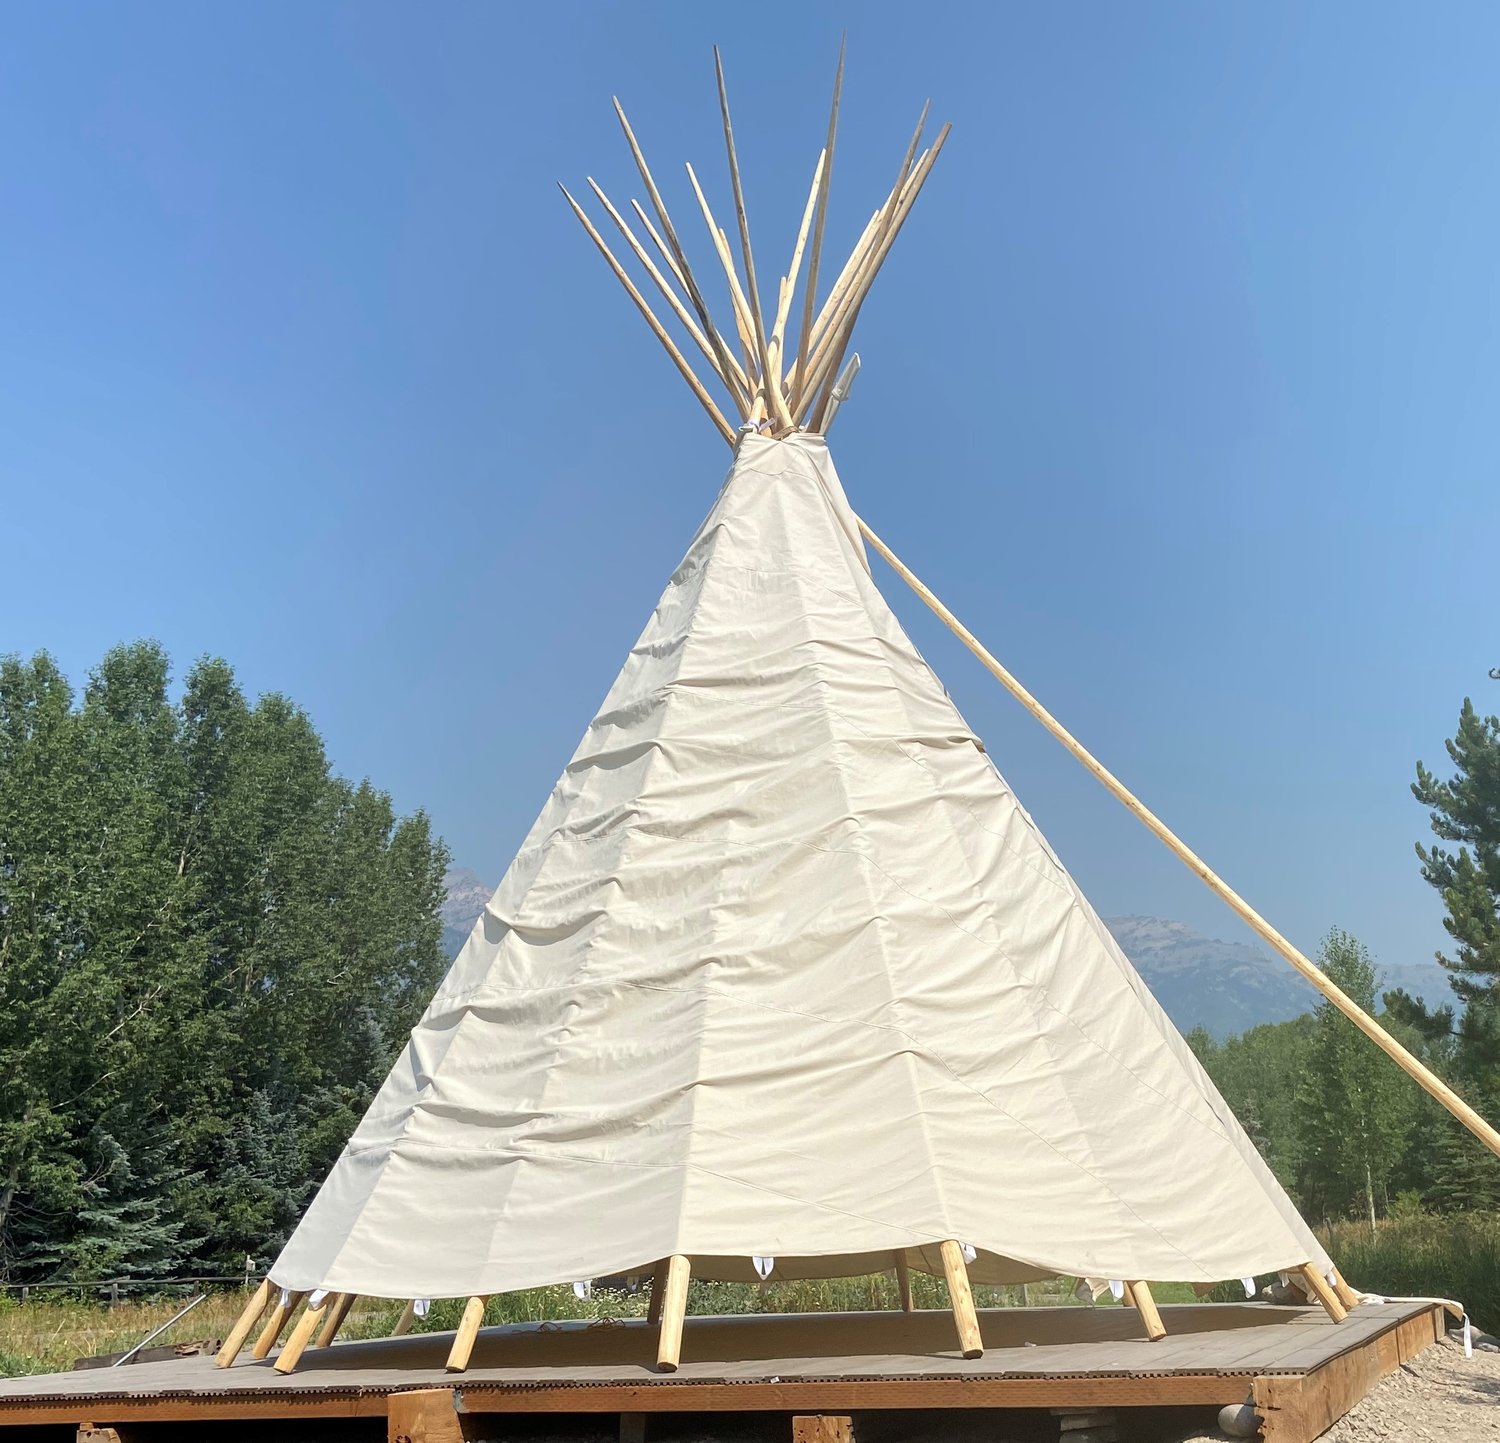 A teepee built by volunteers from Christ Place Church in Georgia is now part of the campus at Jackson Hole Bible College. (Photo/Barry Pullen)